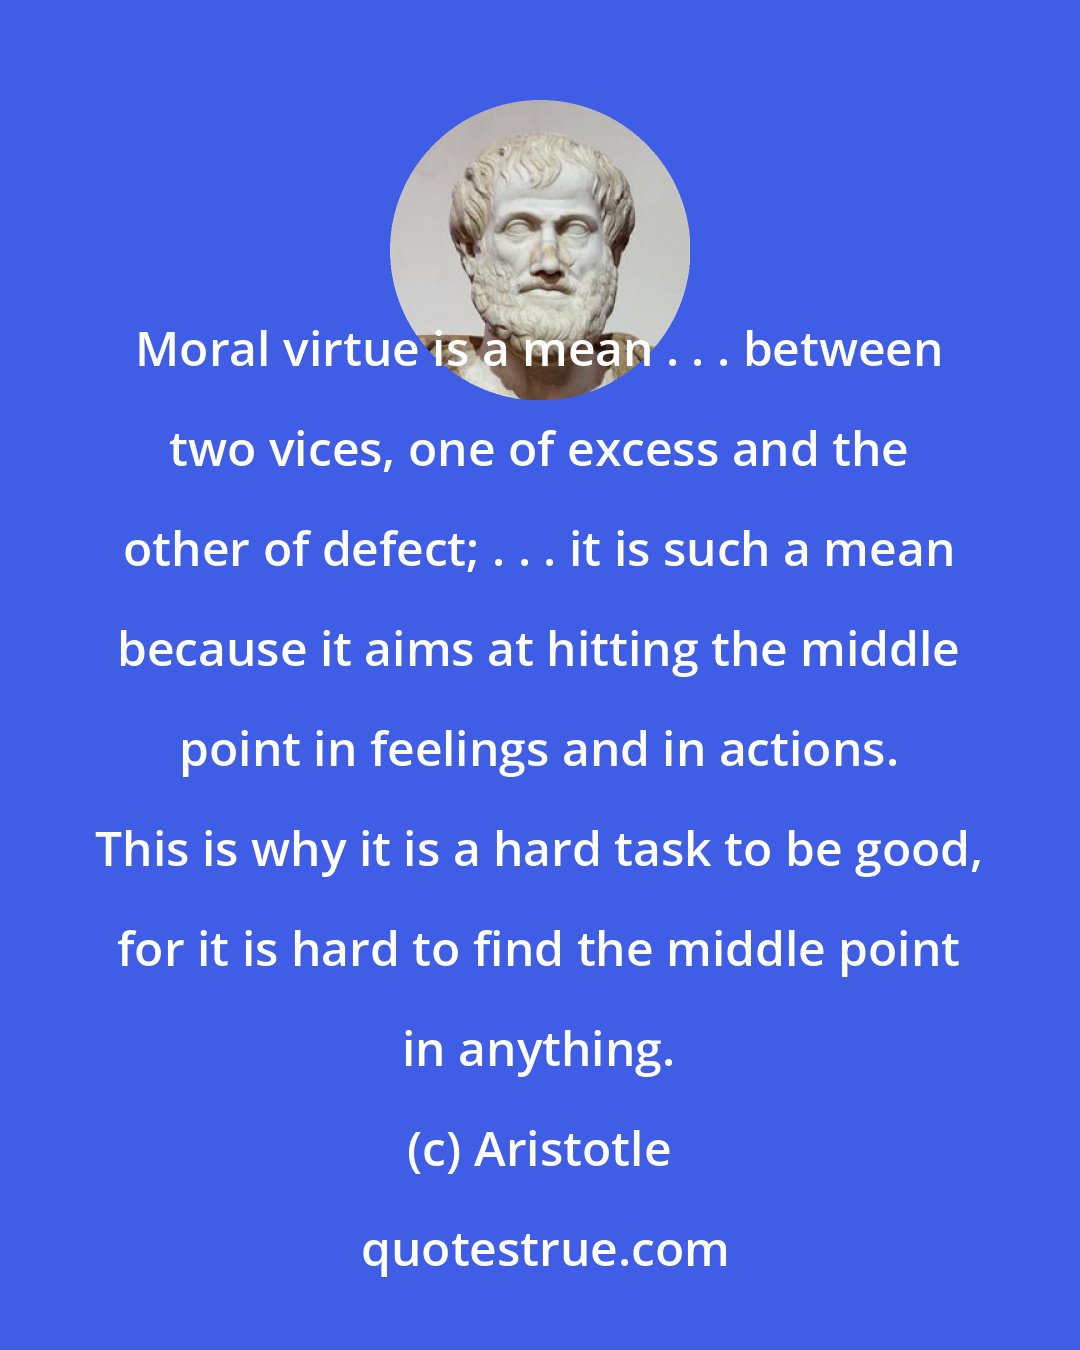 Aristotle: Moral virtue is a mean . . . between two vices, one of excess and the other of defect; . . . it is such a mean because it aims at hitting the middle point in feelings and in actions. This is why it is a hard task to be good, for it is hard to find the middle point in anything.